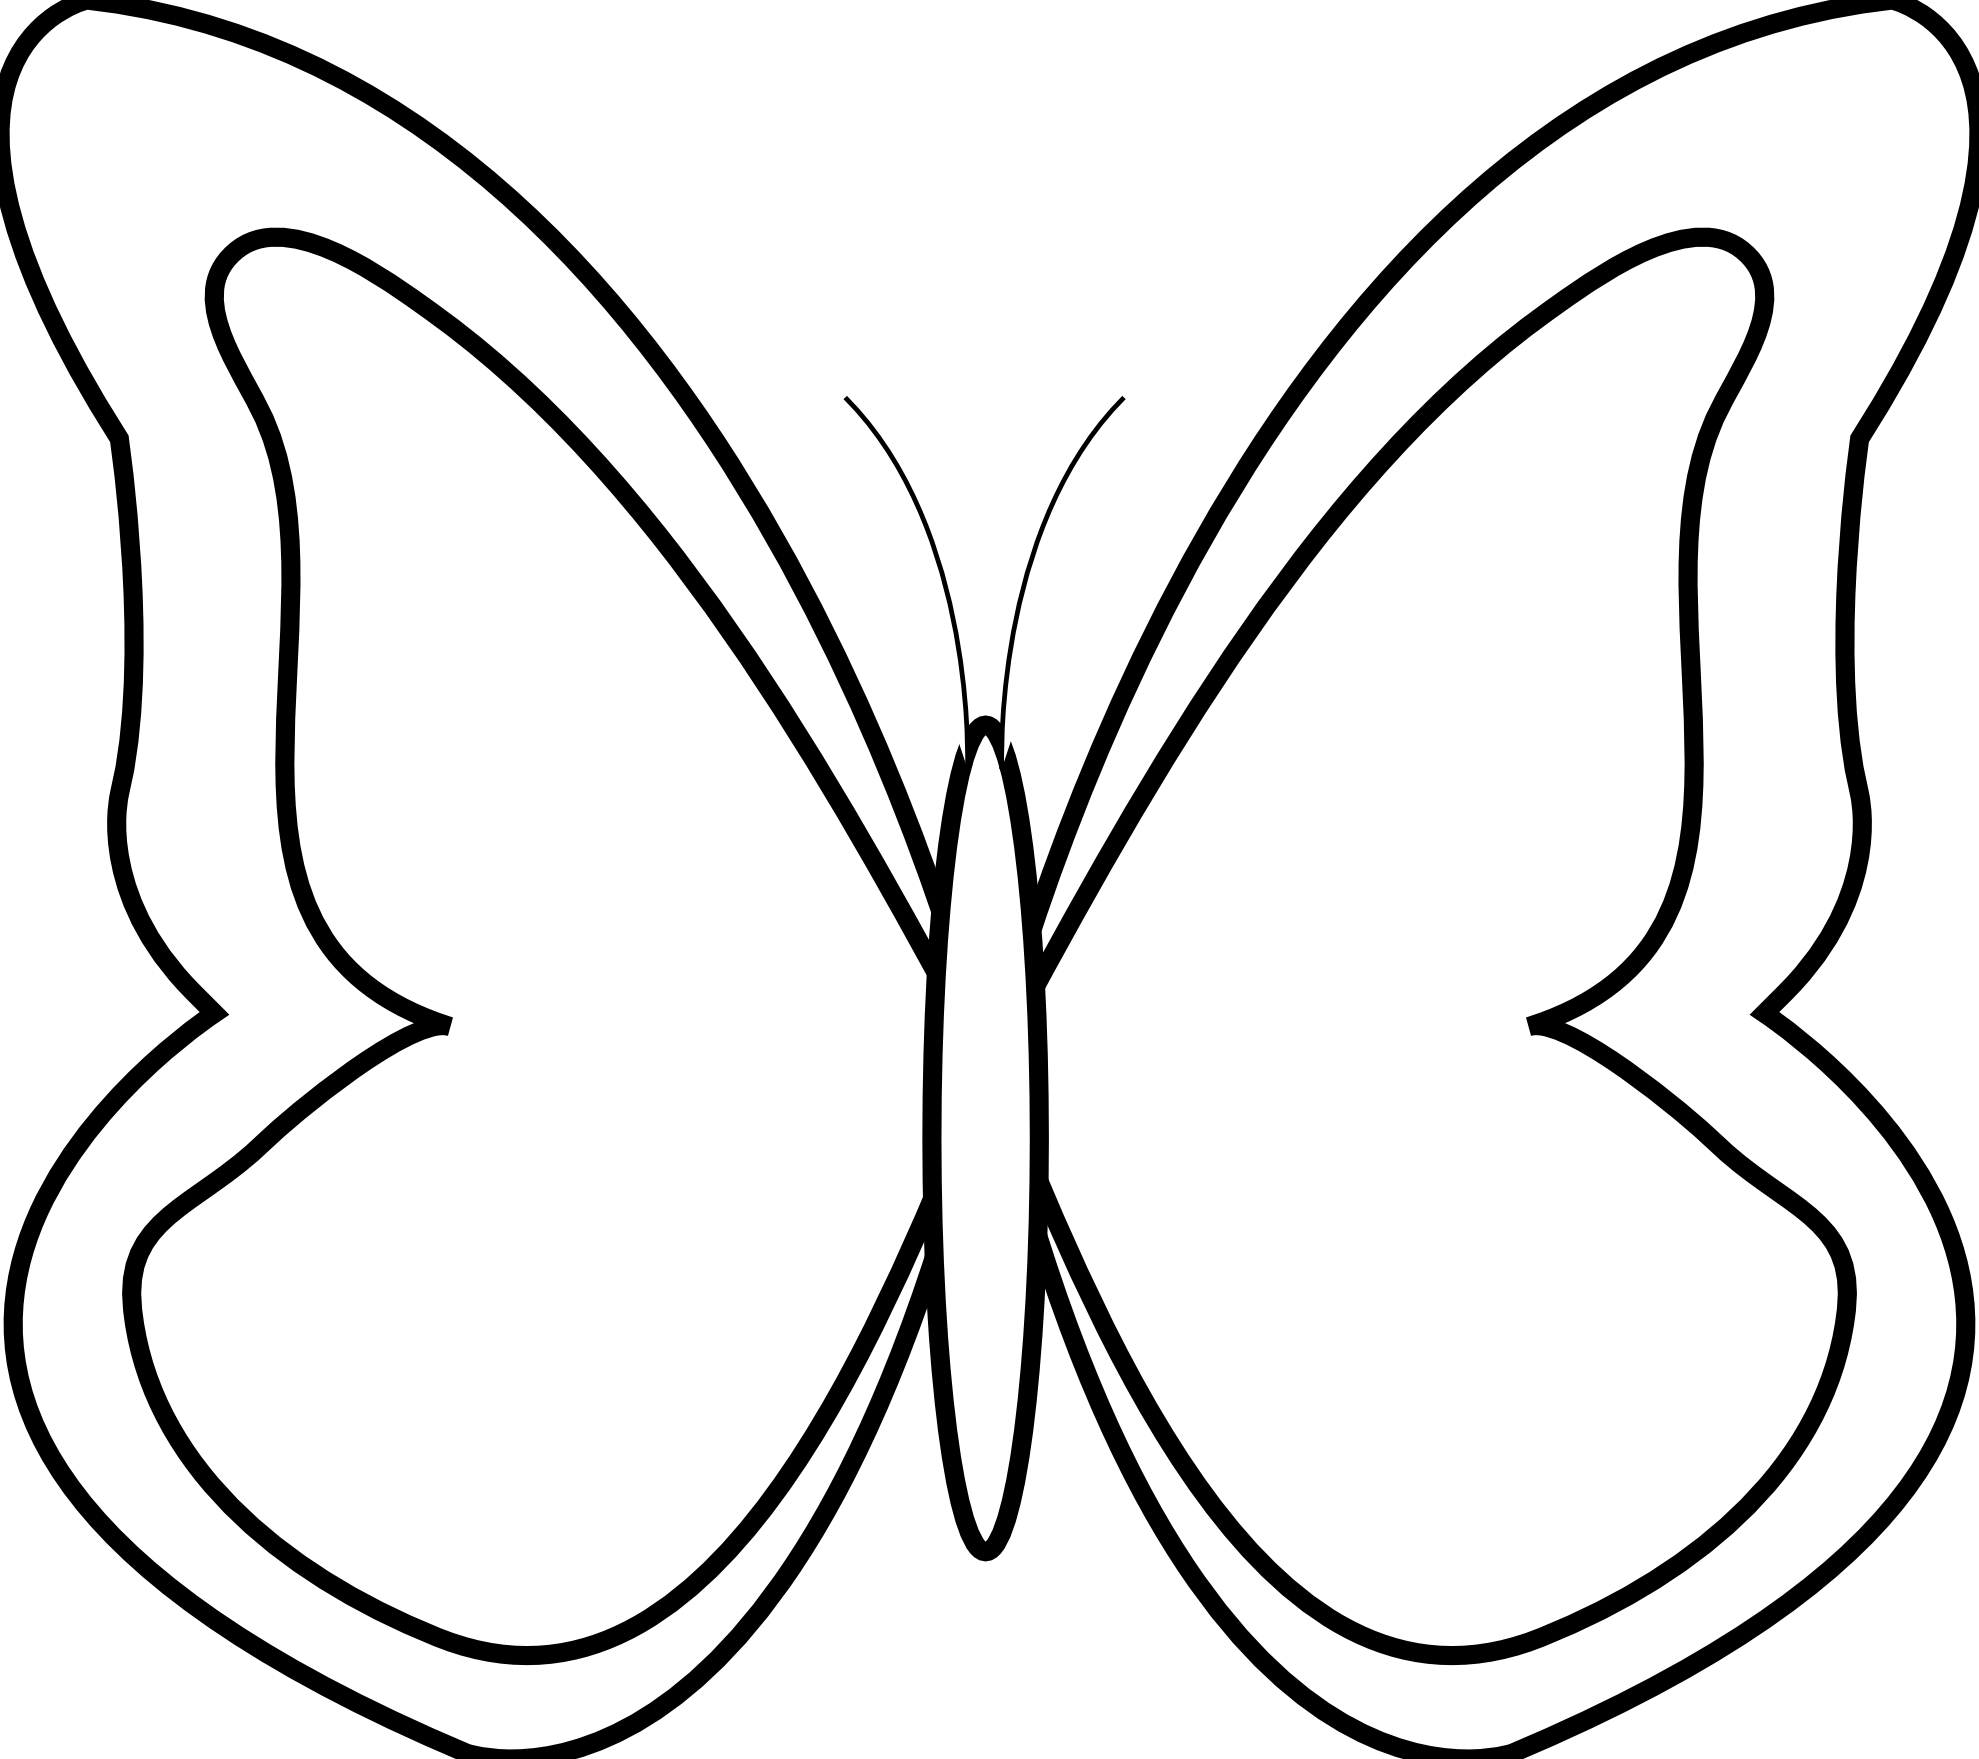 Butterfly Outline Clipart - Cliparts.co